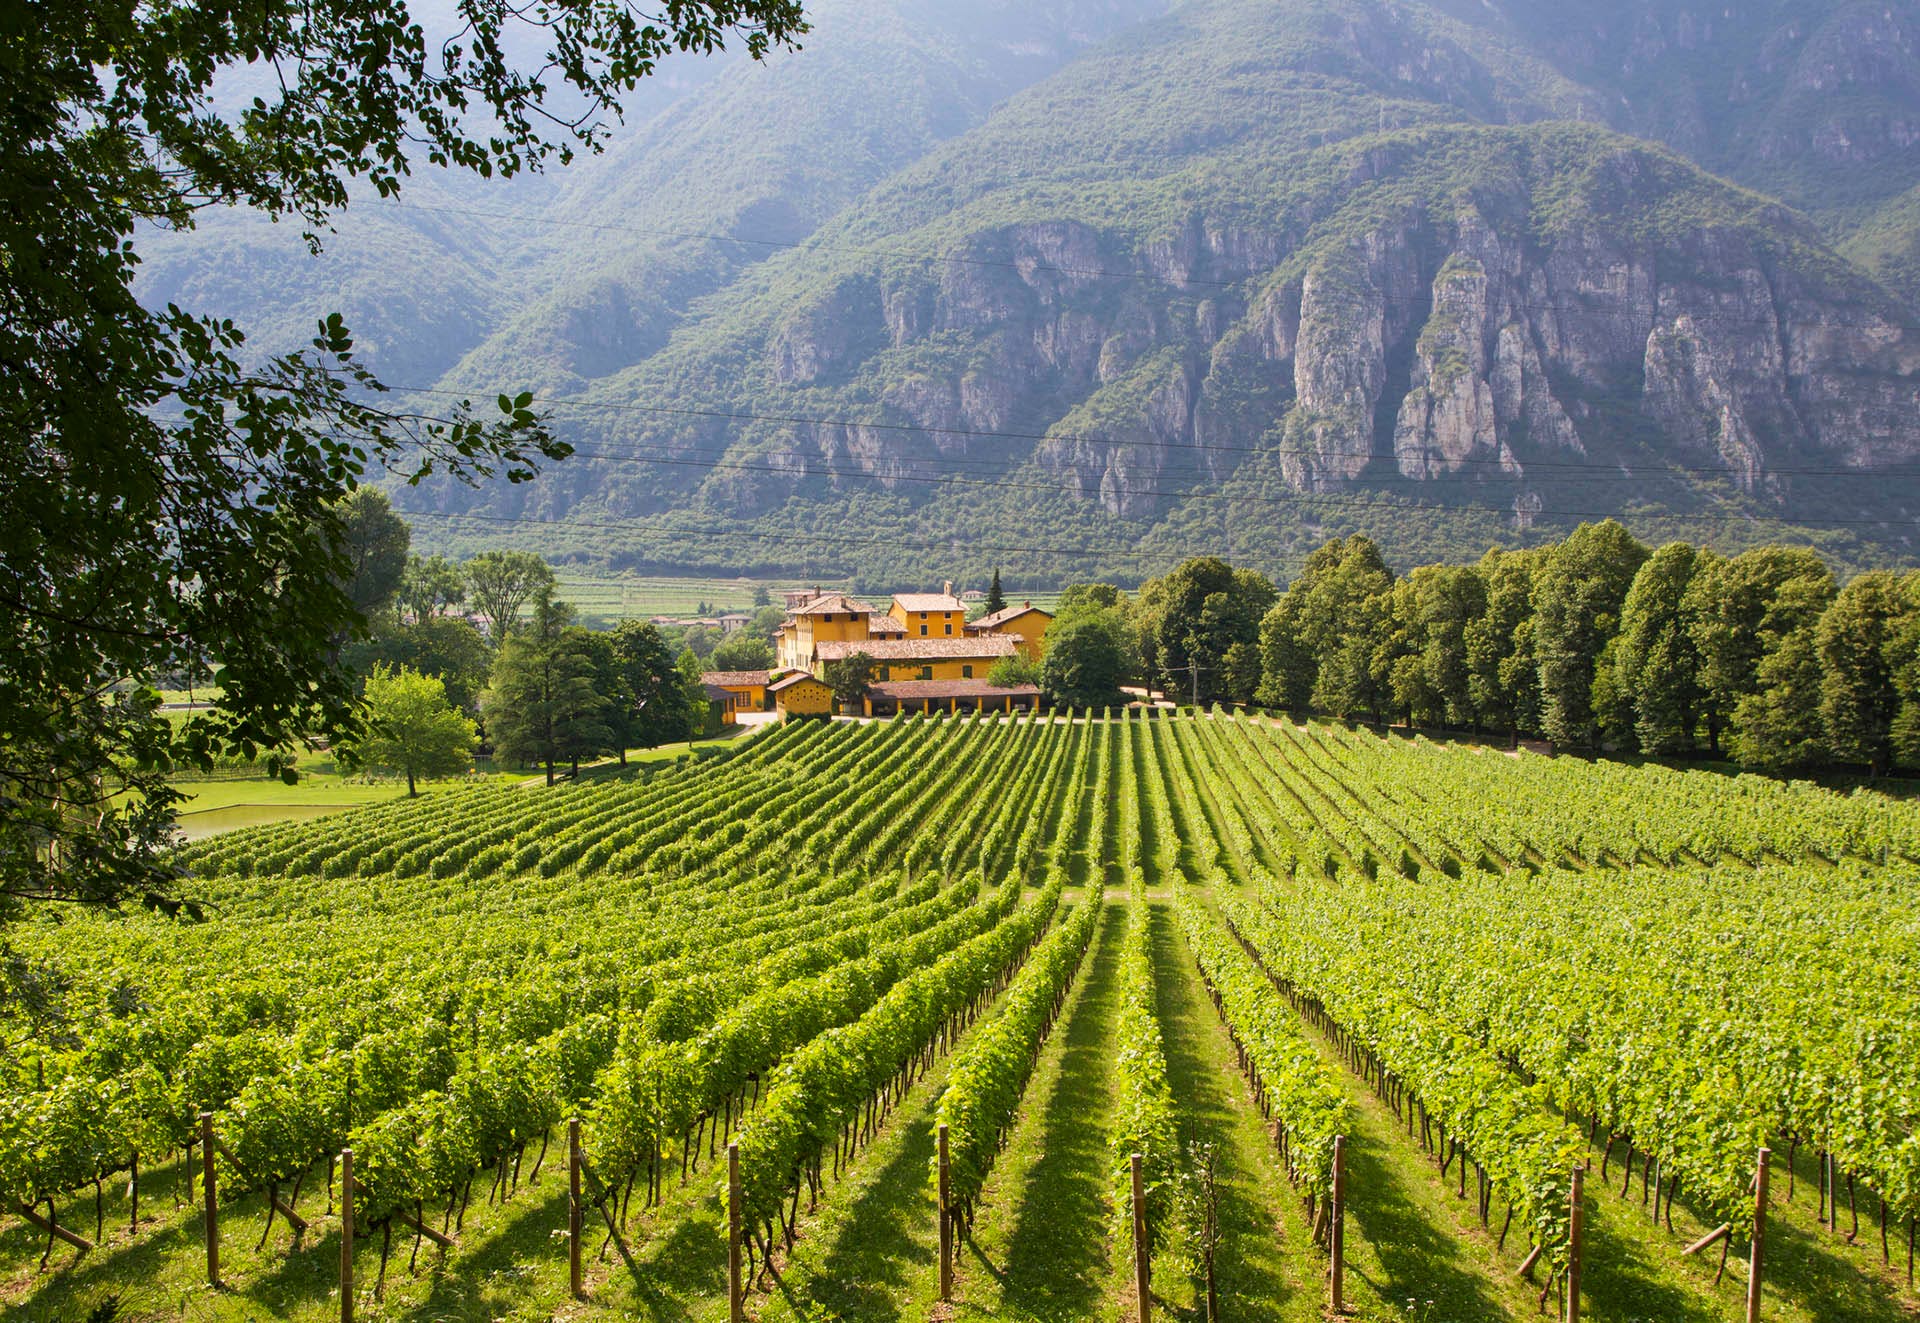 Vineyard in Trento, Italy, with mountains in background